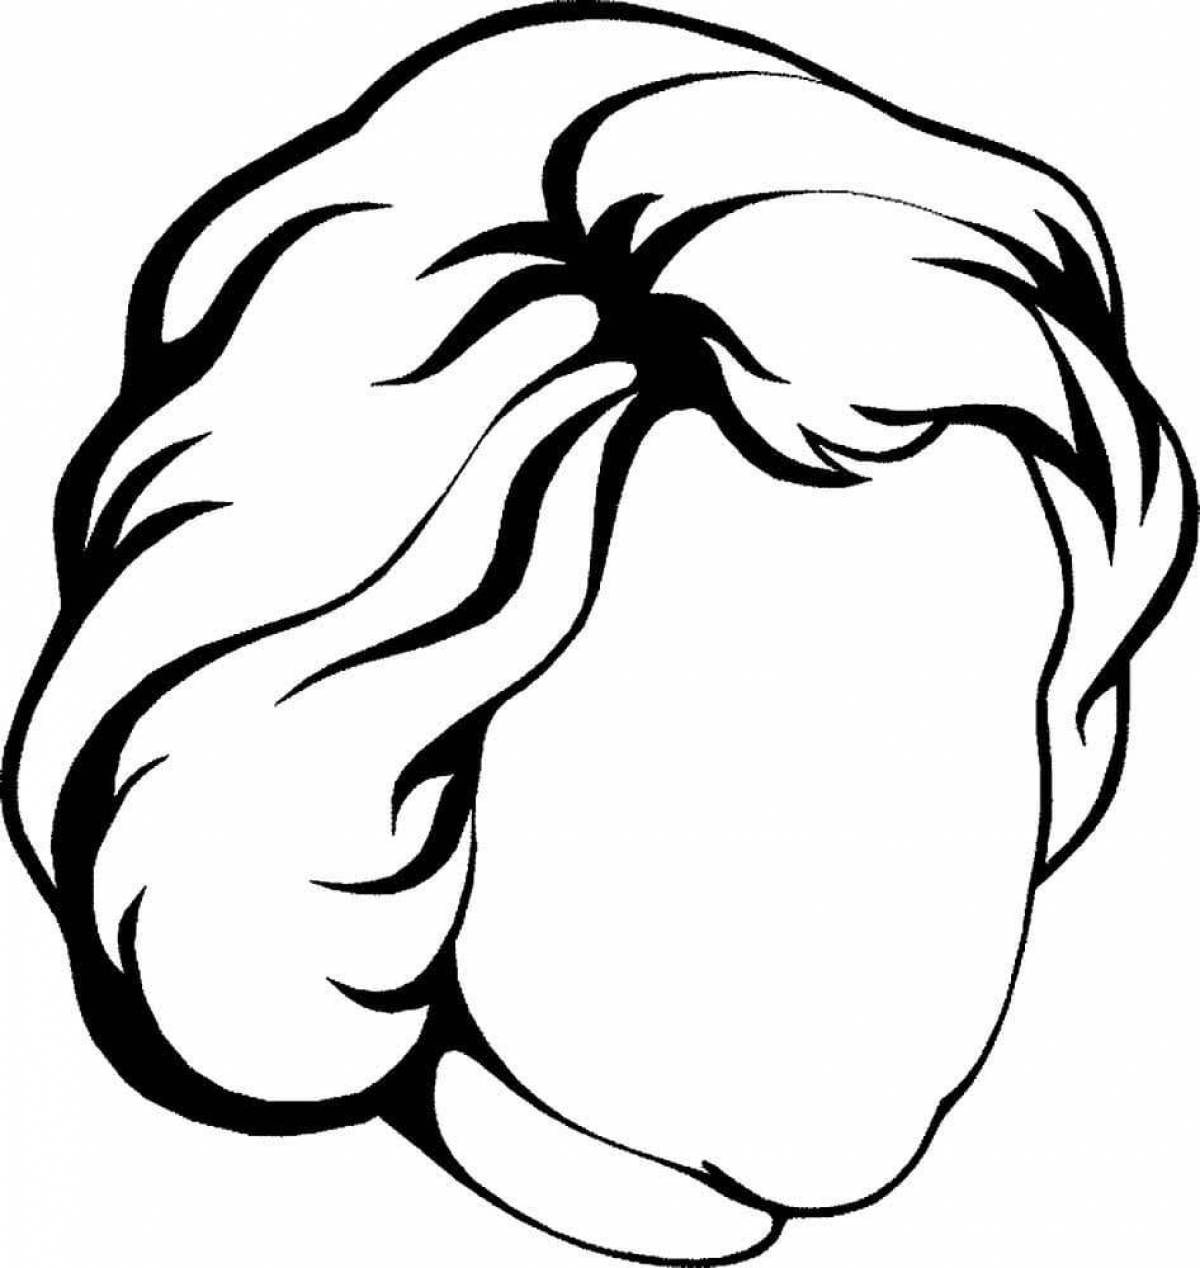 Wavy hair coloring page